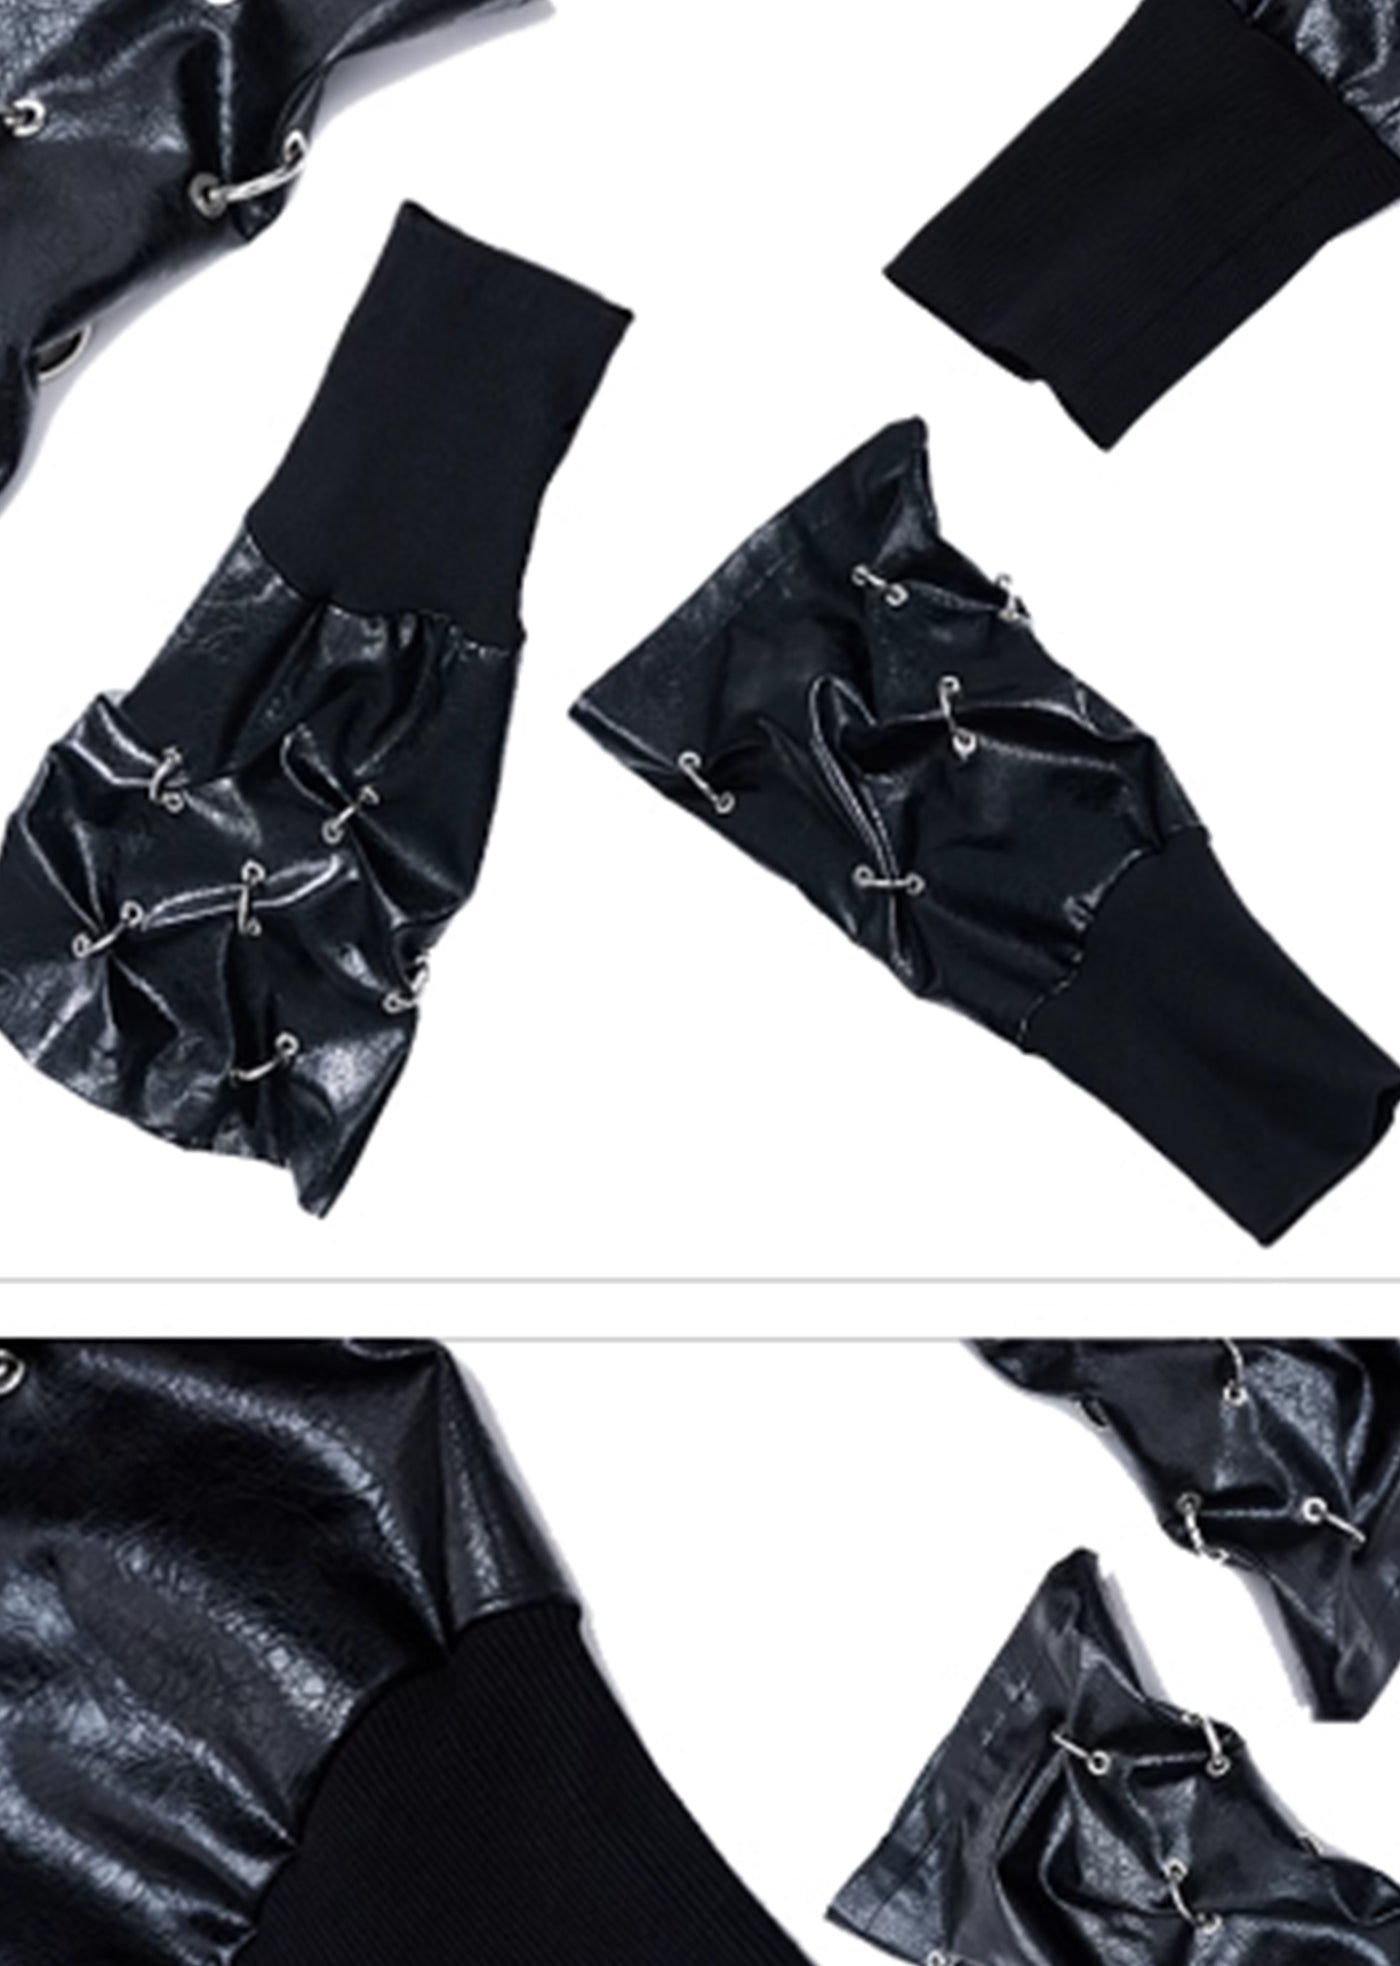 【Antiphase】 Silver Ring Multi-Wave Tight Silhouette Leather Leg Warmers  AP0008